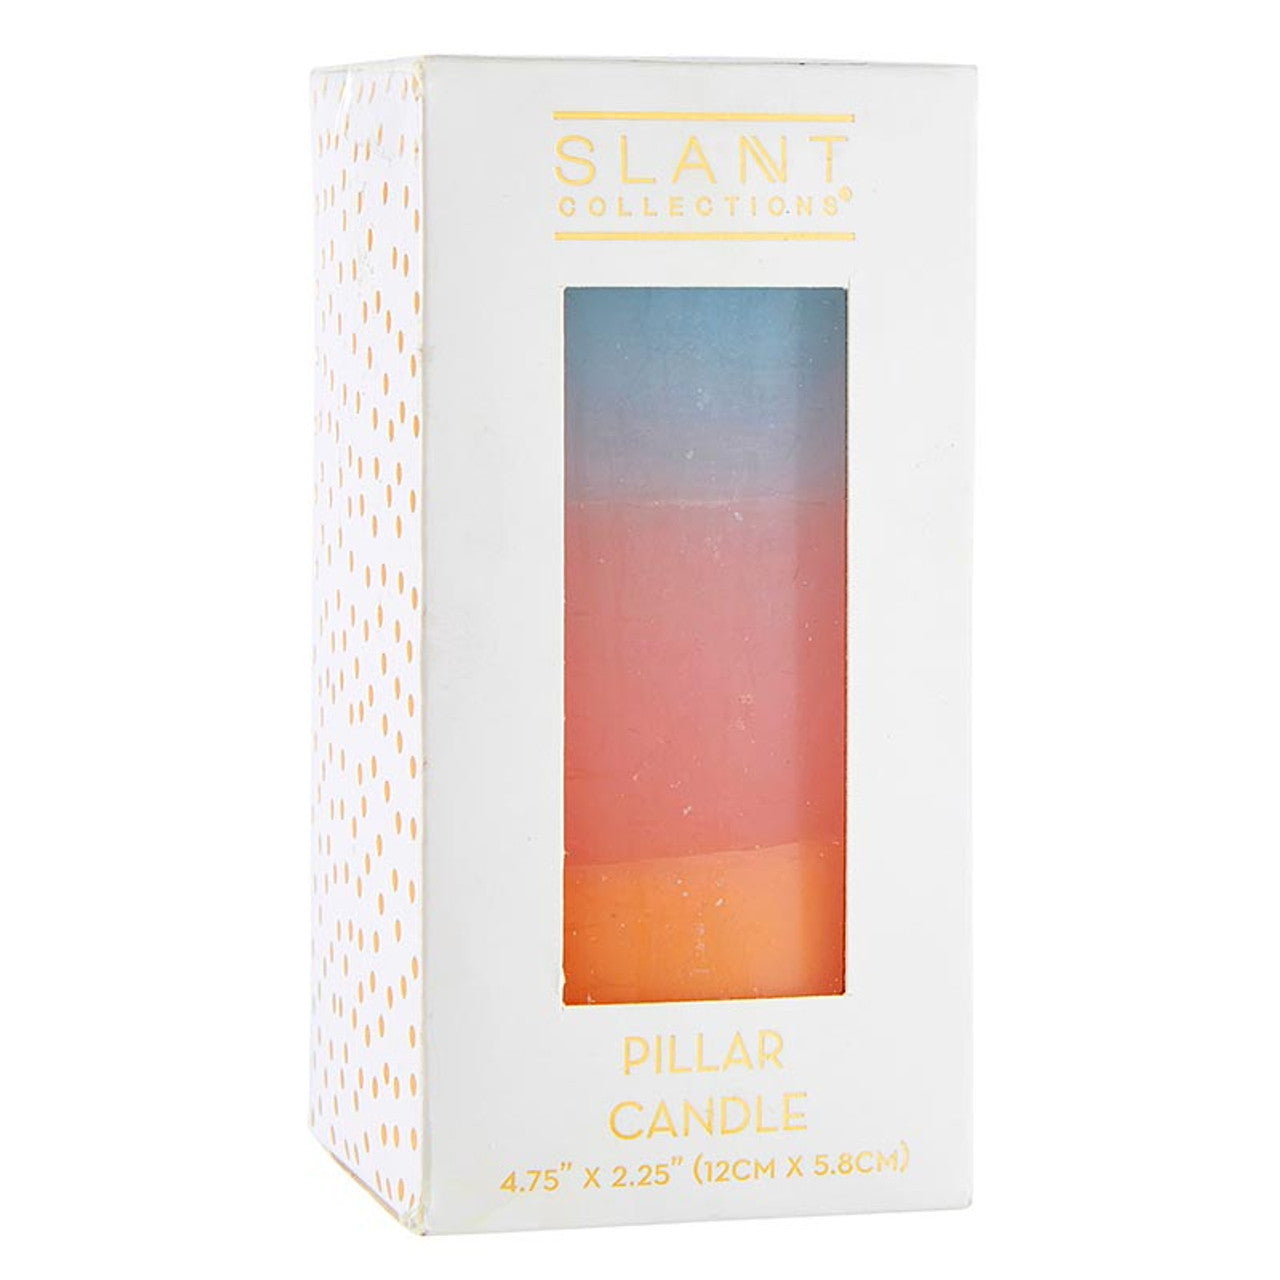 Mini Pillar Candle in Blue Pink Orange | Tri-Colored Ombre Aesthetic Table Candle 4.75"